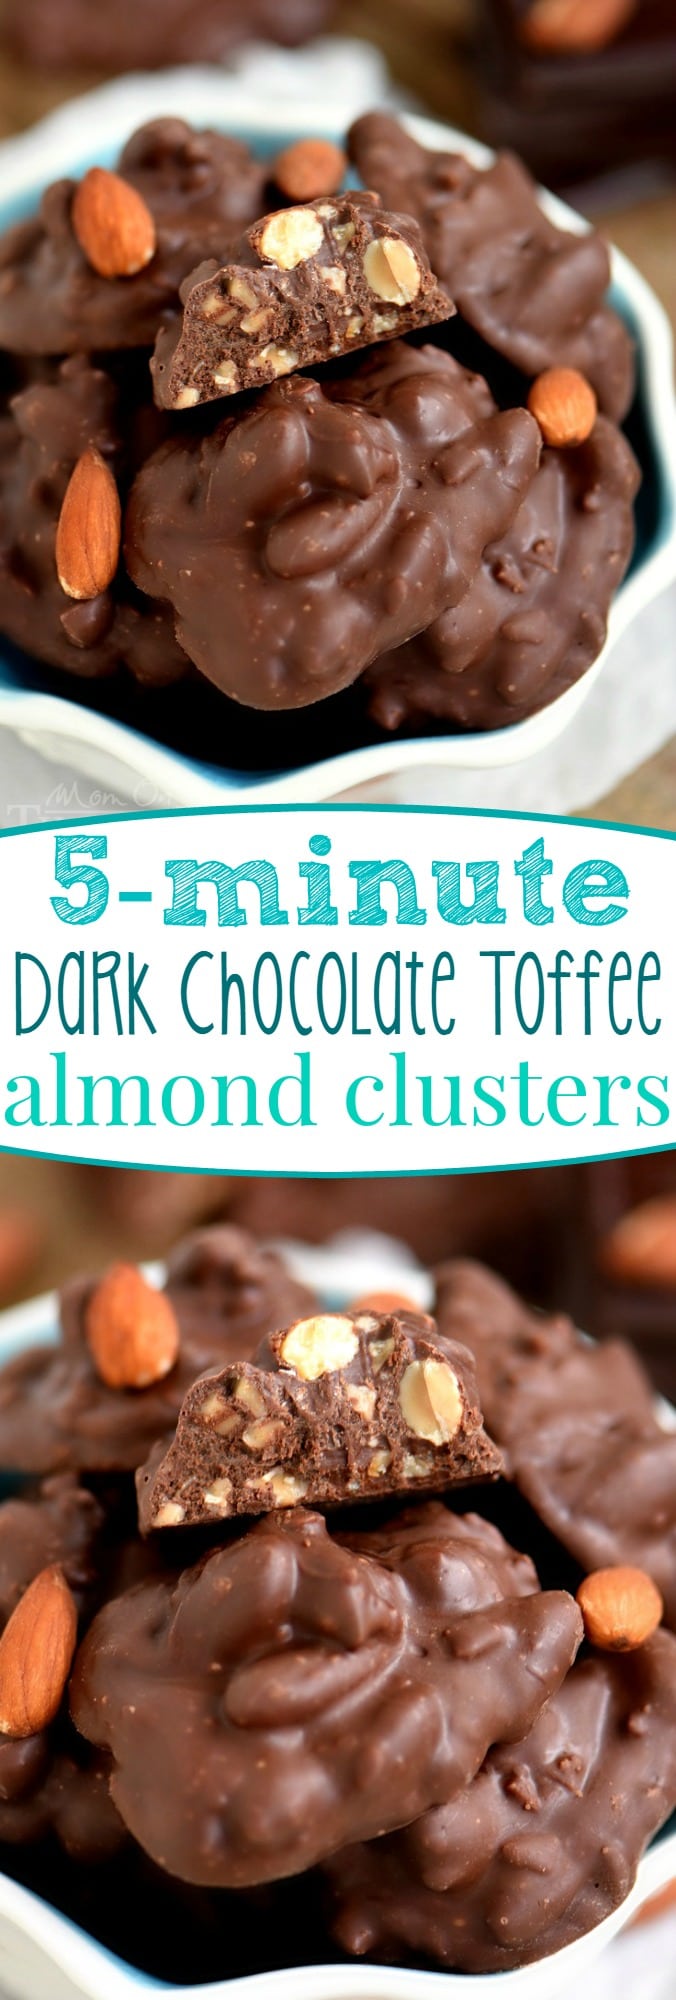 Just 5 minutes and 5 ingredients is all you'll need for these easy and delicious Dark Chocolate Toffee Almond Clusters! Heart healthy almonds and sweet toffee bits are coated with antioxidant rich dark chocolate resulting in an incredibly satisfying better-for-you sweet treat that everyone will enjoy!